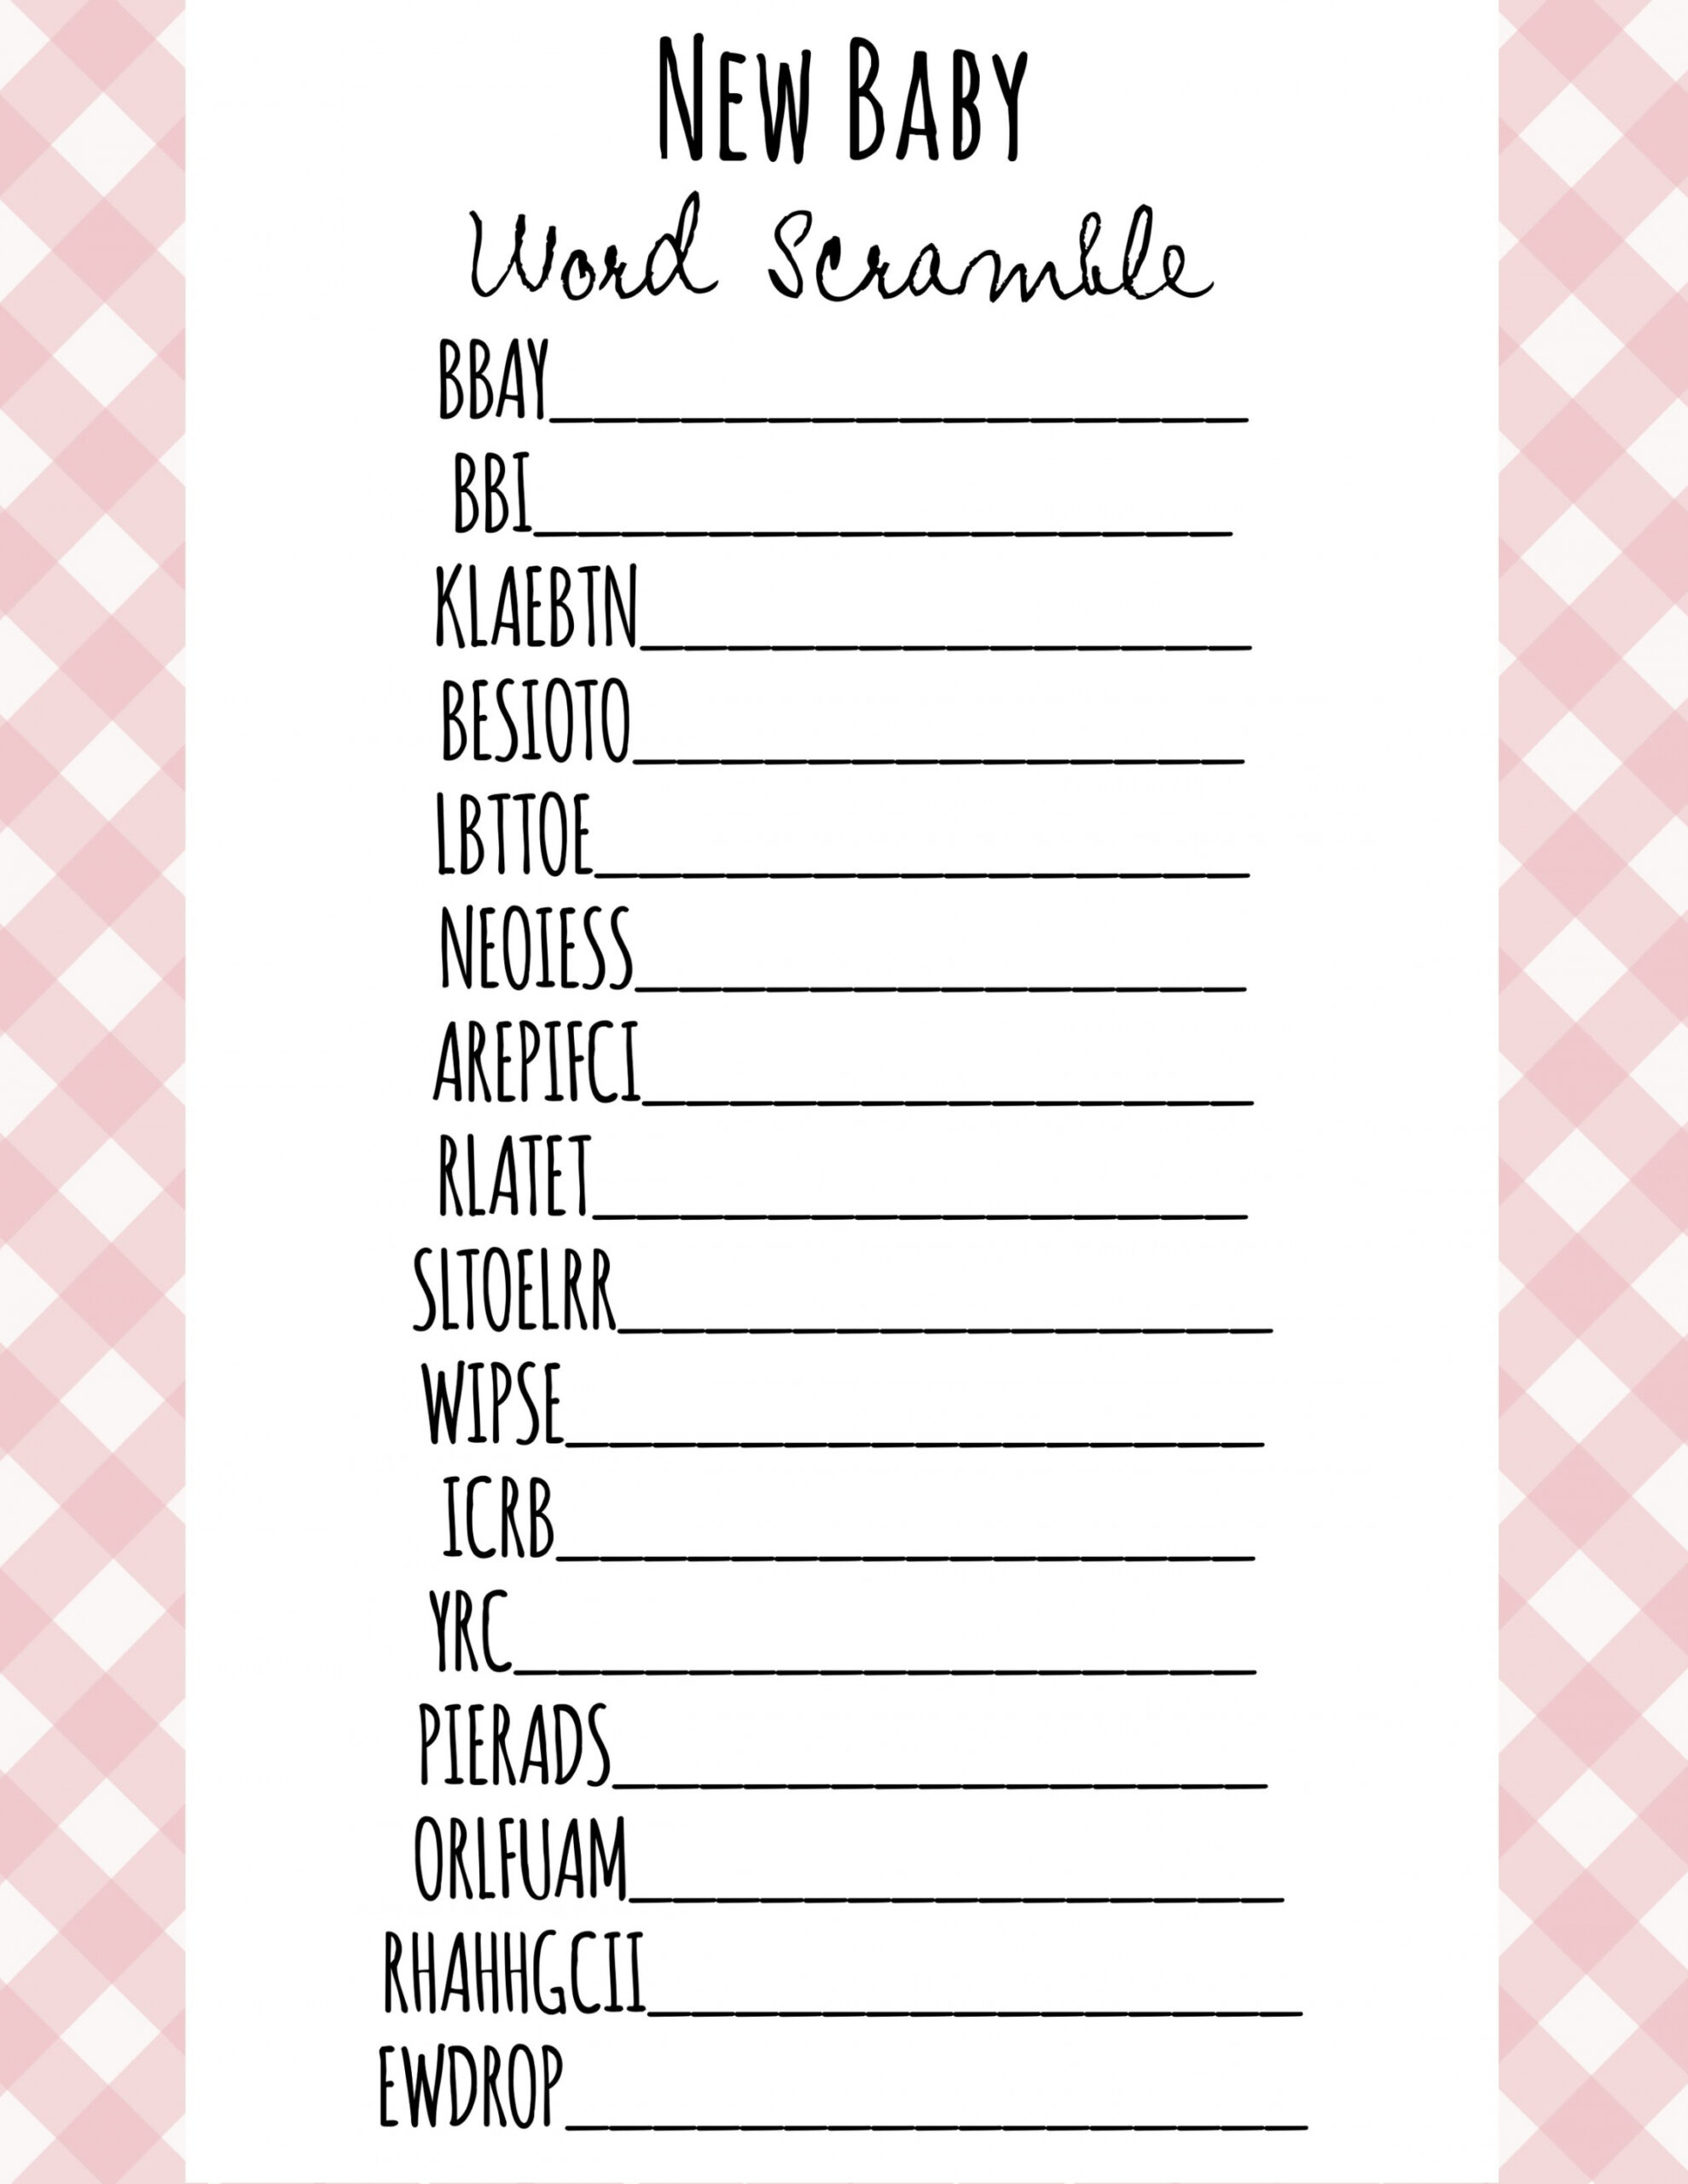 Baby Shower Games Free Printable Sheets - Printable - Free Printable Baby Shower Games - Download Instantly!